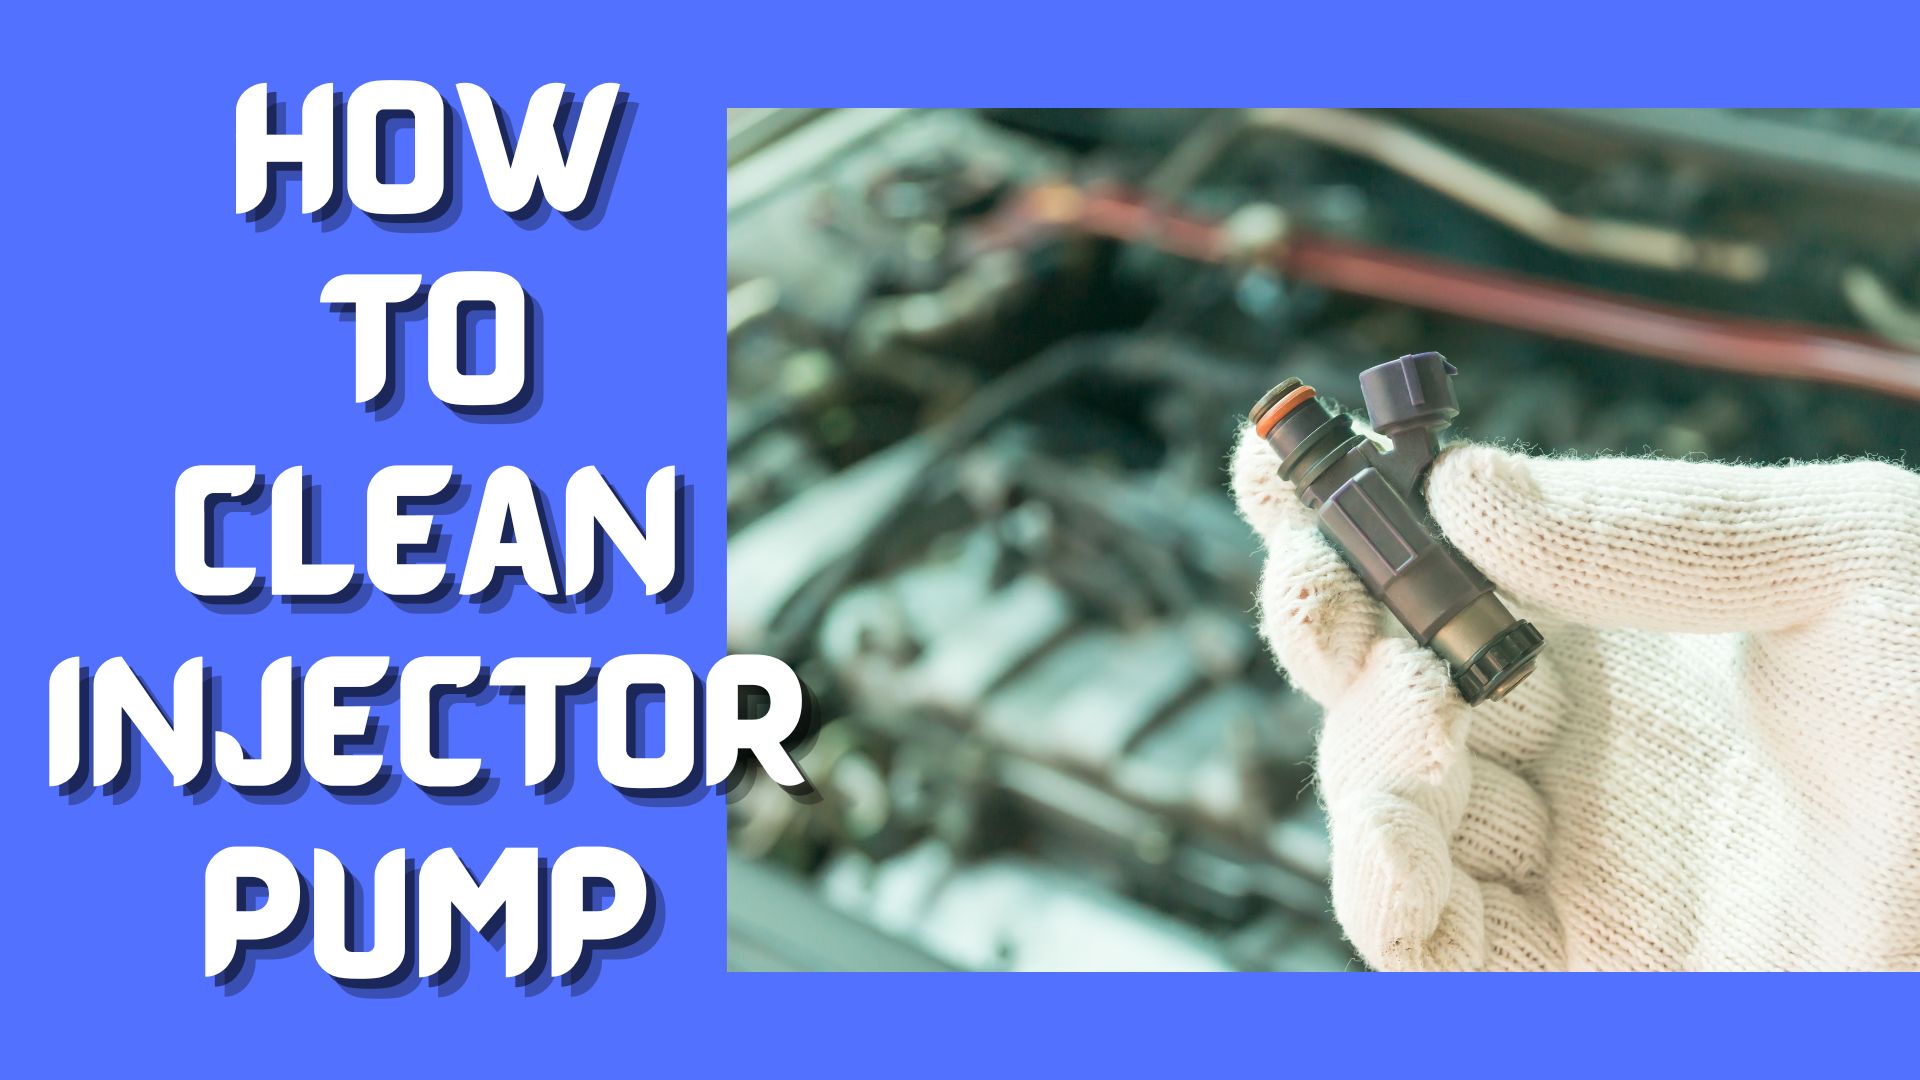 How To Clean Injector Pump Of a Truck